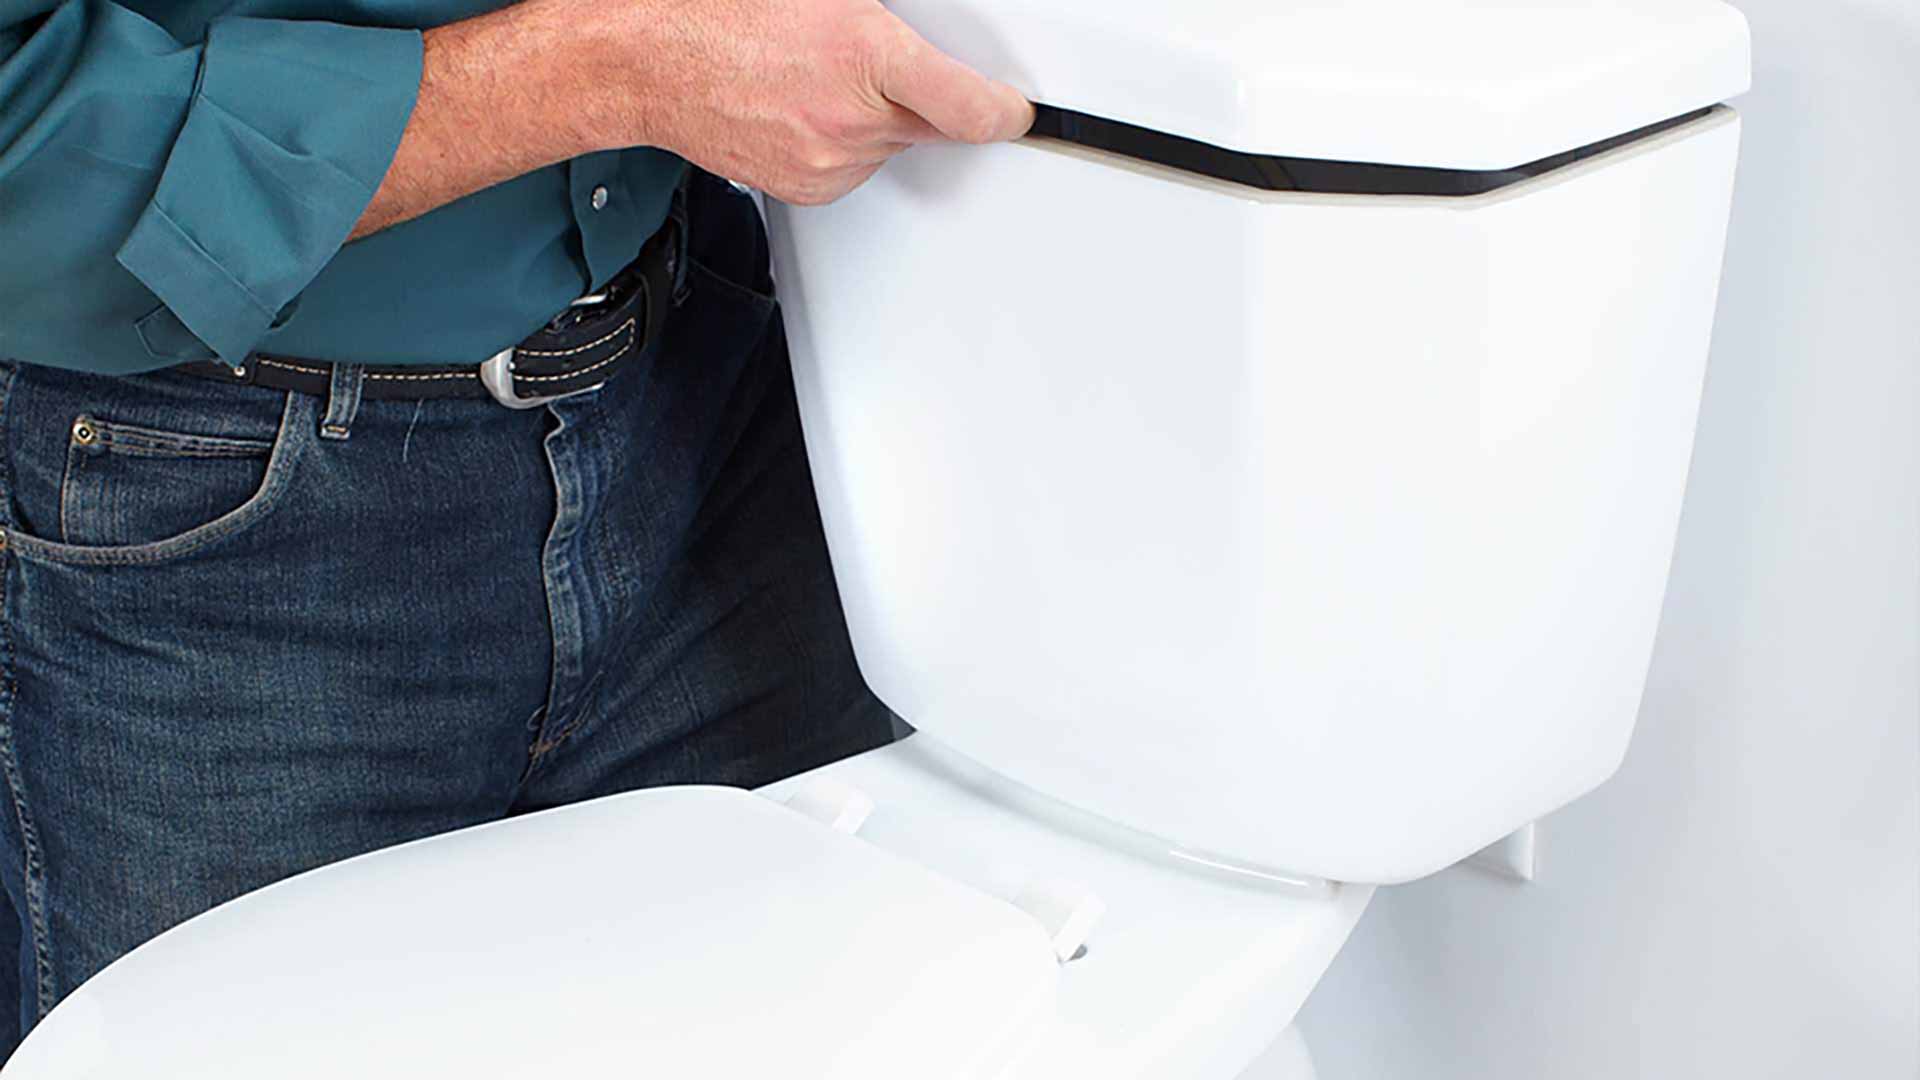 Top 3 Most Frequently Asked Plumbing Questions